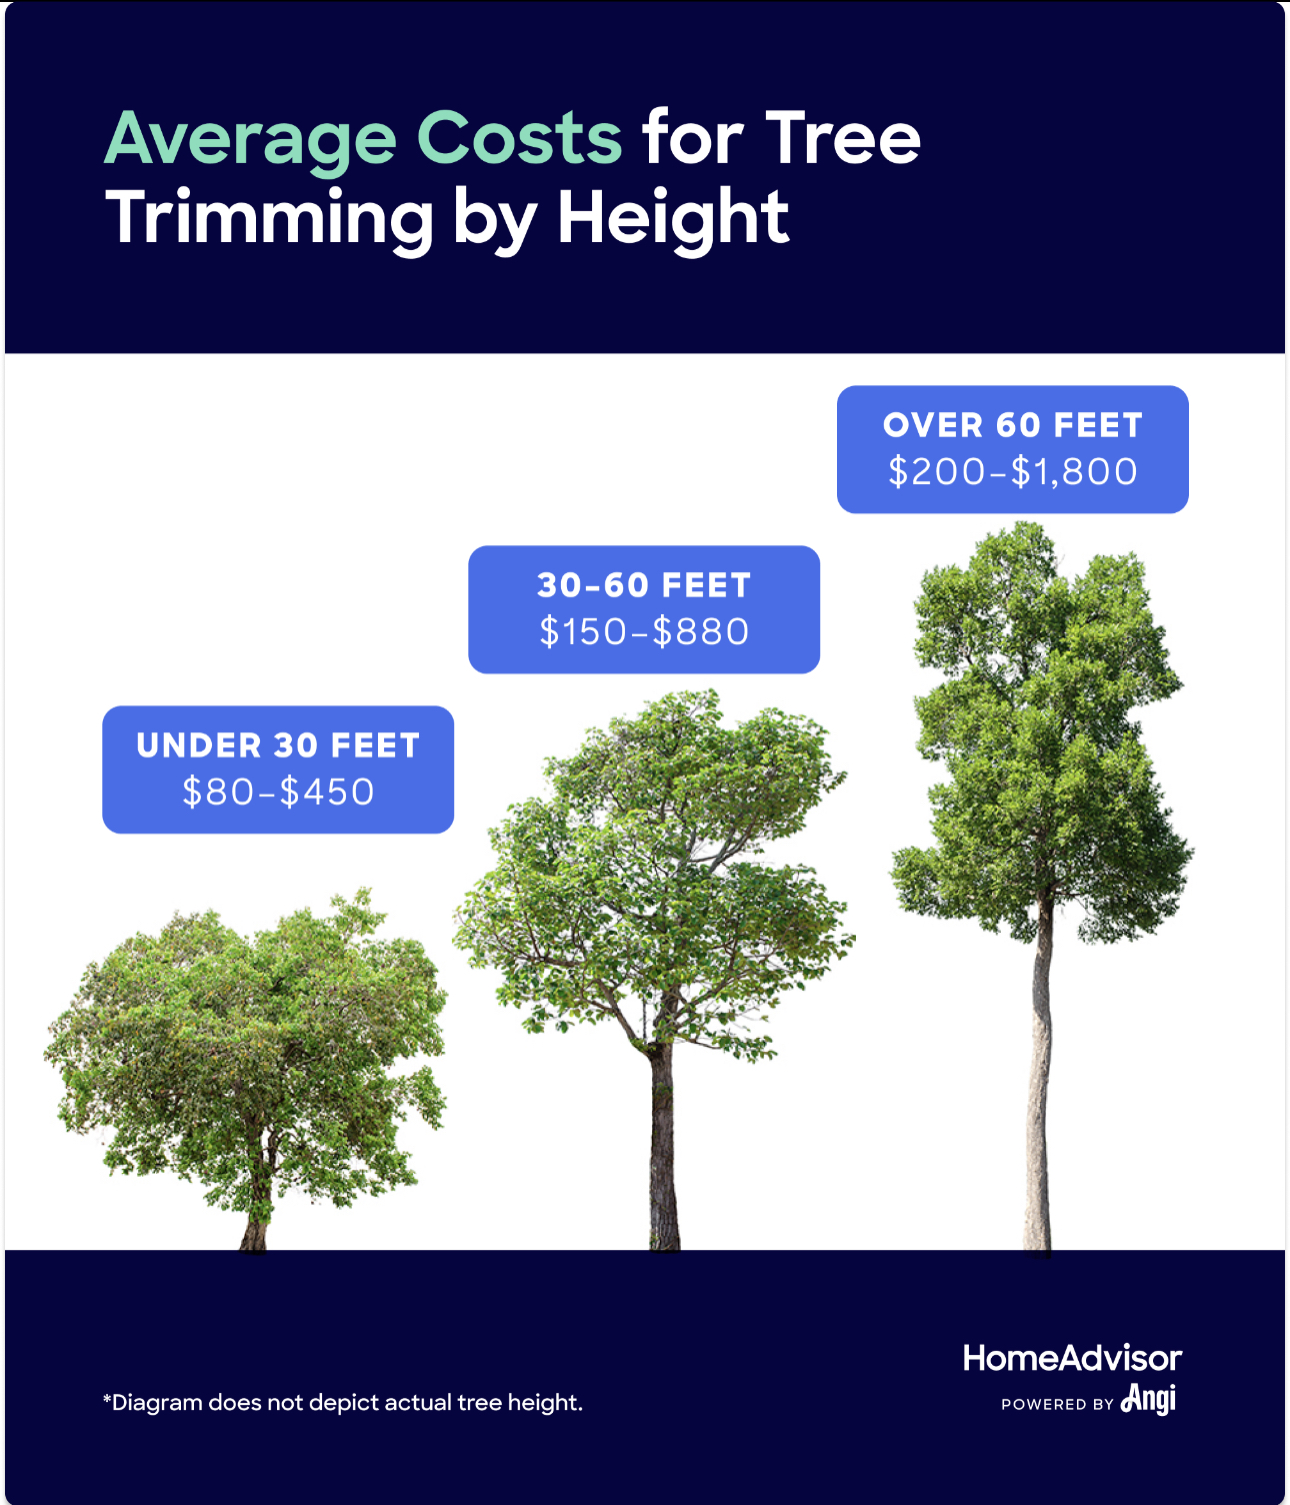 Tree services and their costs vary depending on the height of the tree. For instance, the average cost to remove a small tree under 30 feet tall ranges from $150 to $500, while medium trees between 30 to 60 feet may cost between $300 to $1,000. Large trees from 60 to 80 feet tall can cost between $650 to $2,000 to remove, and extra-large trees over 80 feet tall may range from $1,200 to $2,700. Additionally, fallen tree removal costs average from $100 to $600, and dead tree removal ranges from $800 to $1,600.